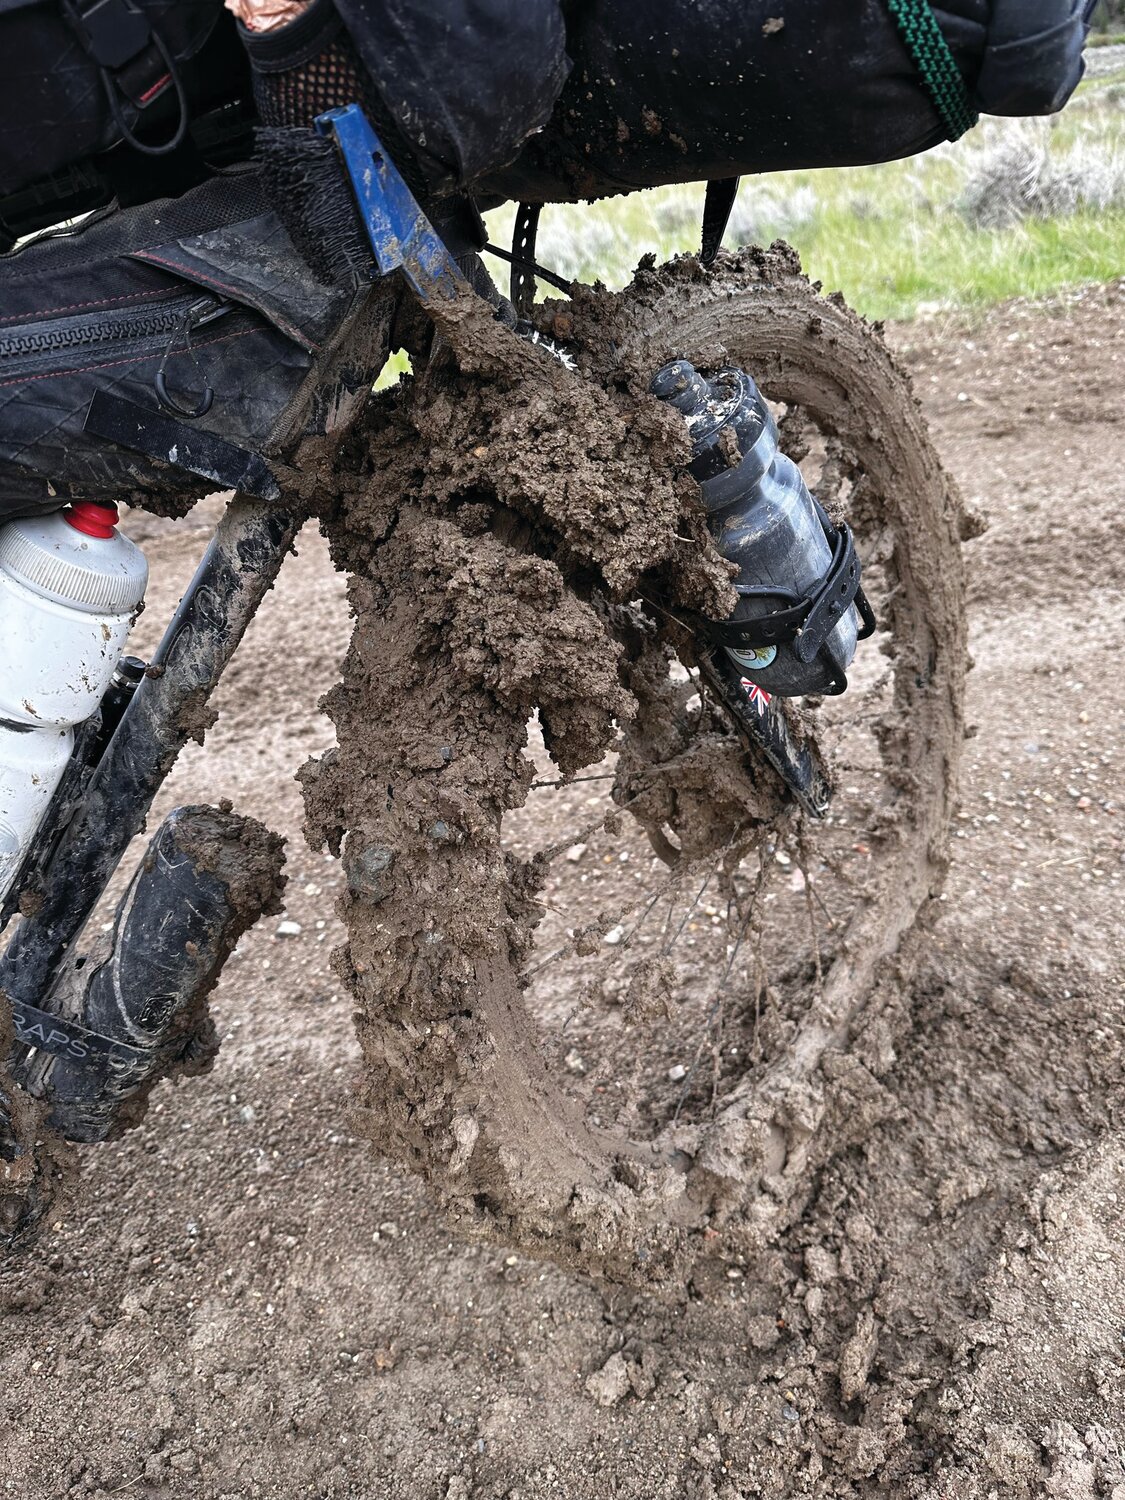 Perkasie’s Mark Gibson slogged through thick mud during the Tour Divide bike race.